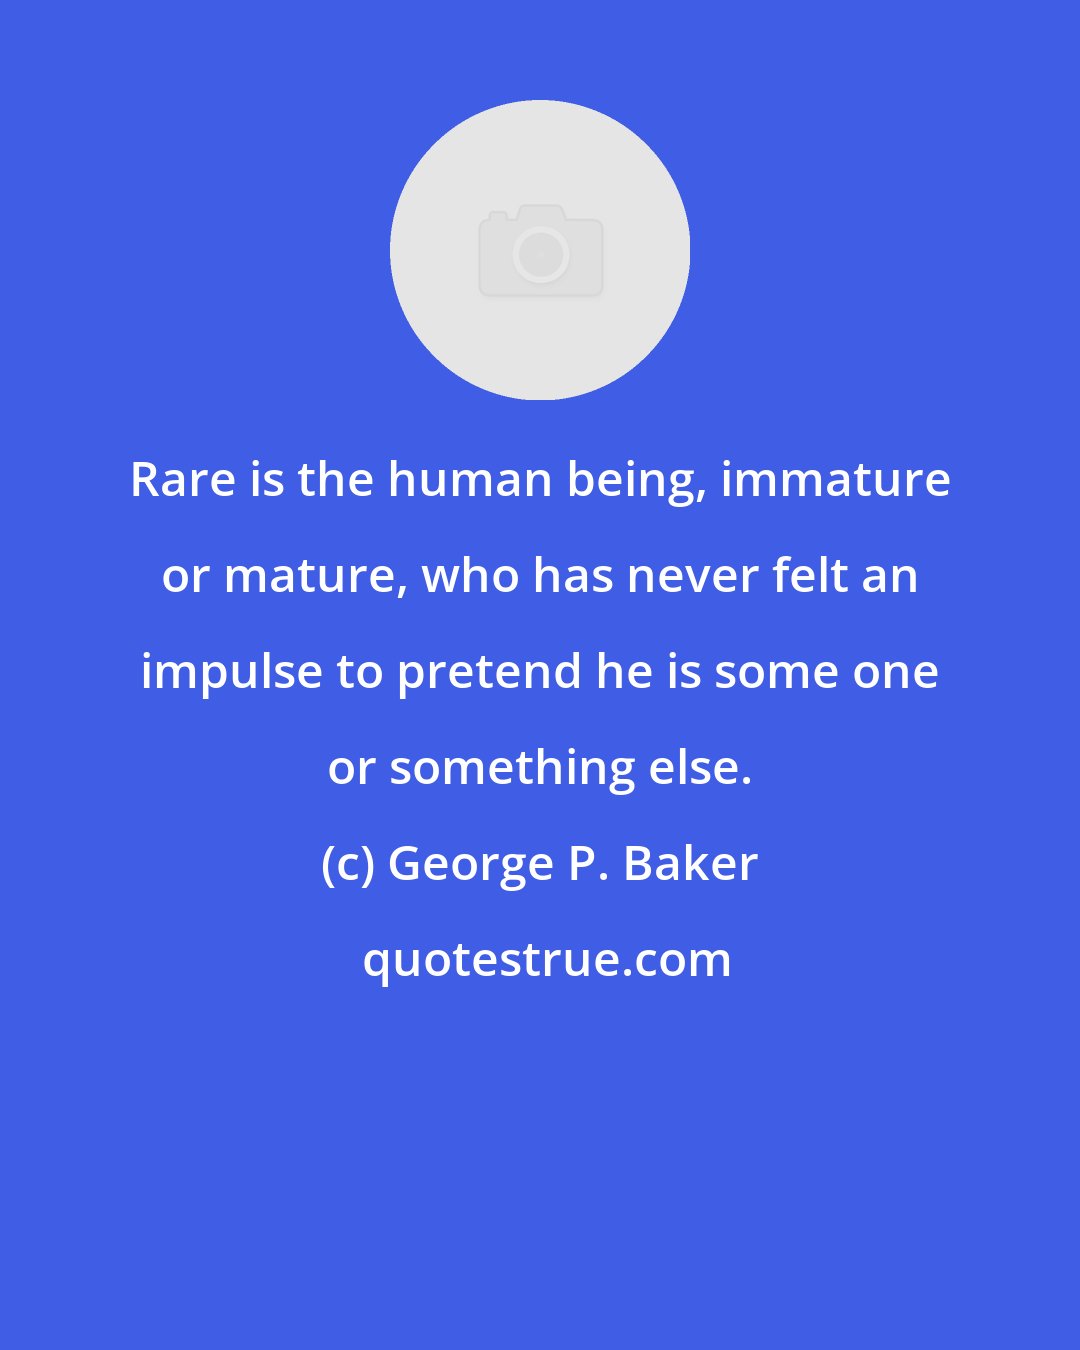 George P. Baker: Rare is the human being, immature or mature, who has never felt an impulse to pretend he is some one or something else.